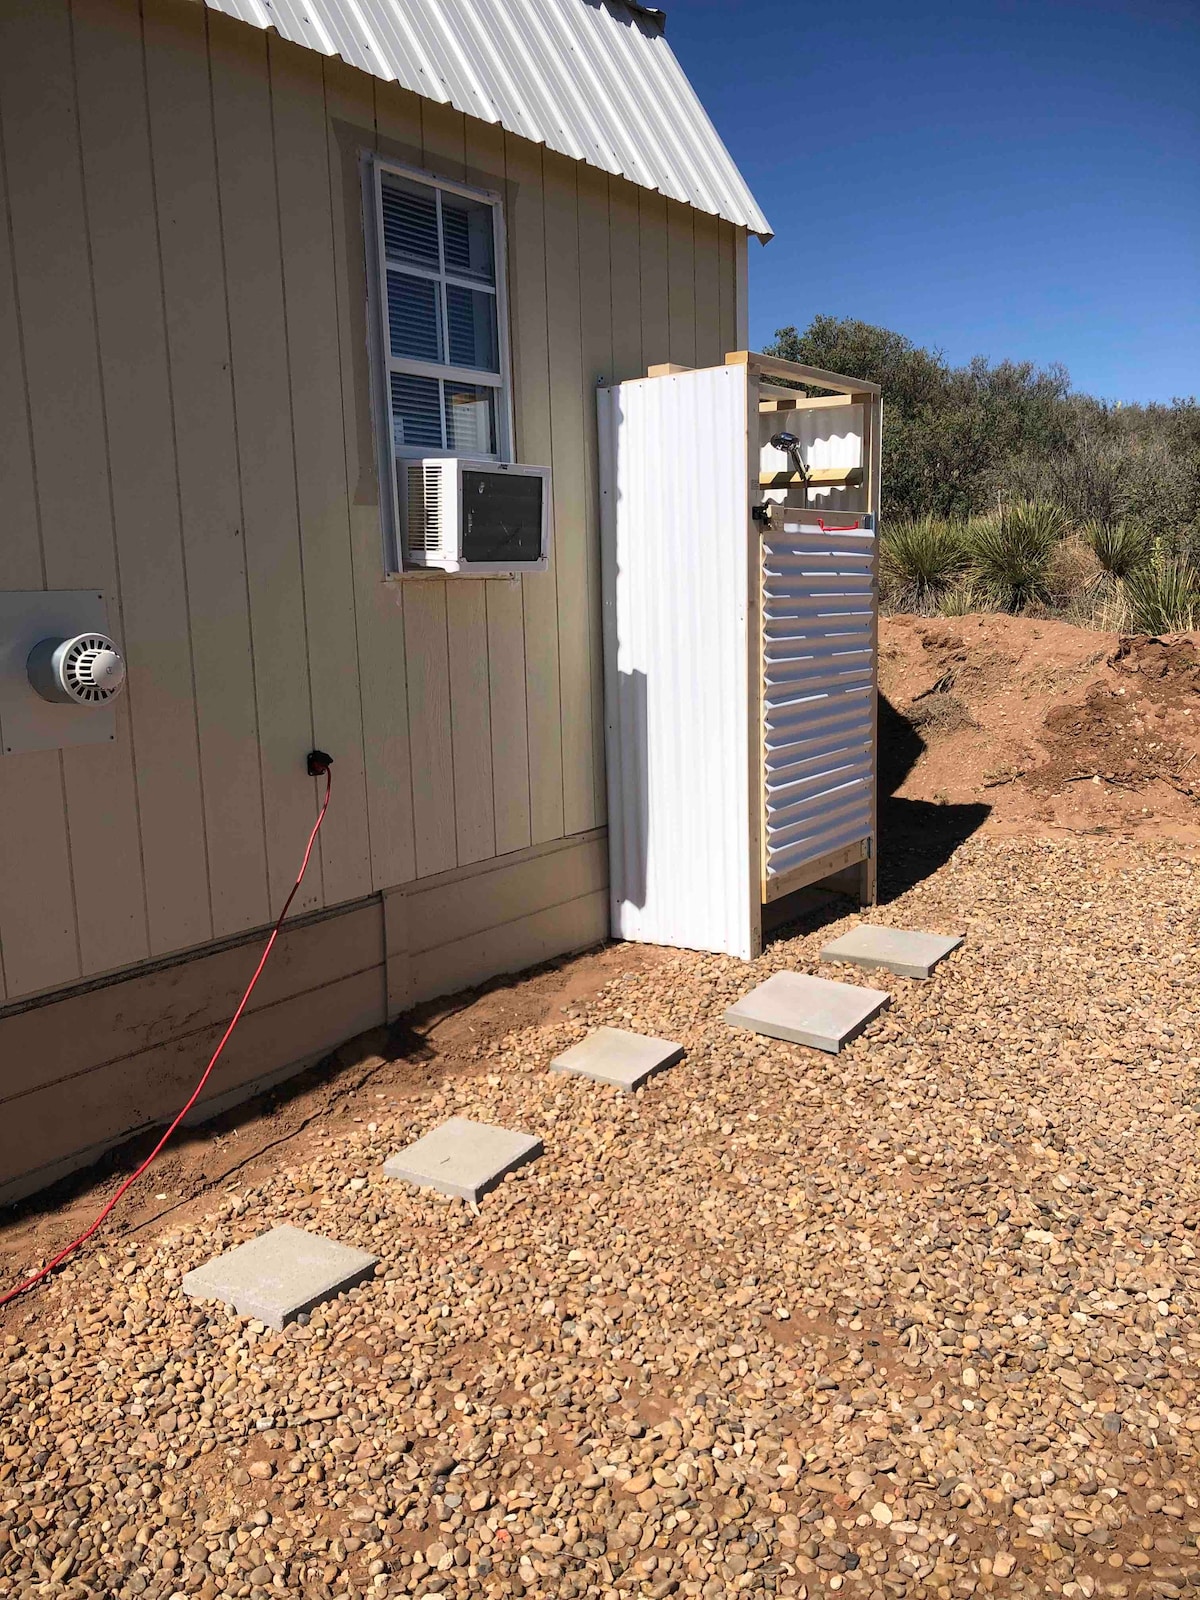 Semi off grid cabin and campsite at Lake Meredith